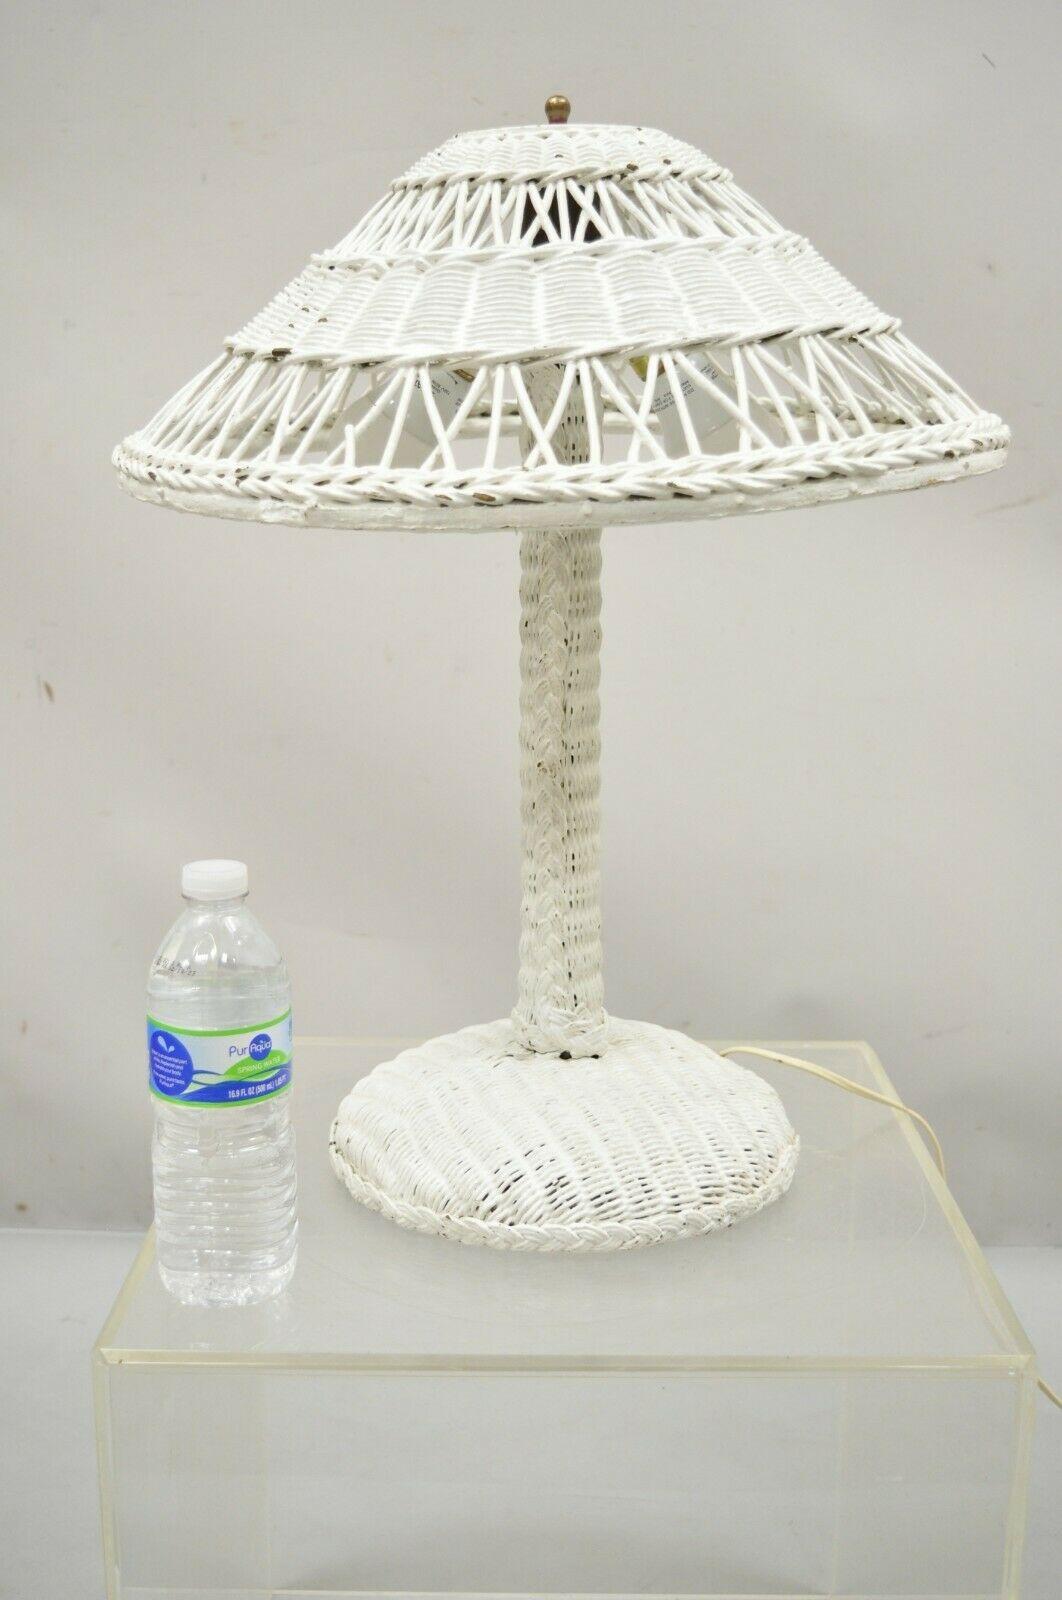 Antique Heywood Wakefield Arts & Crafts White Wicker Table Lamp wth Shade For Sale 5